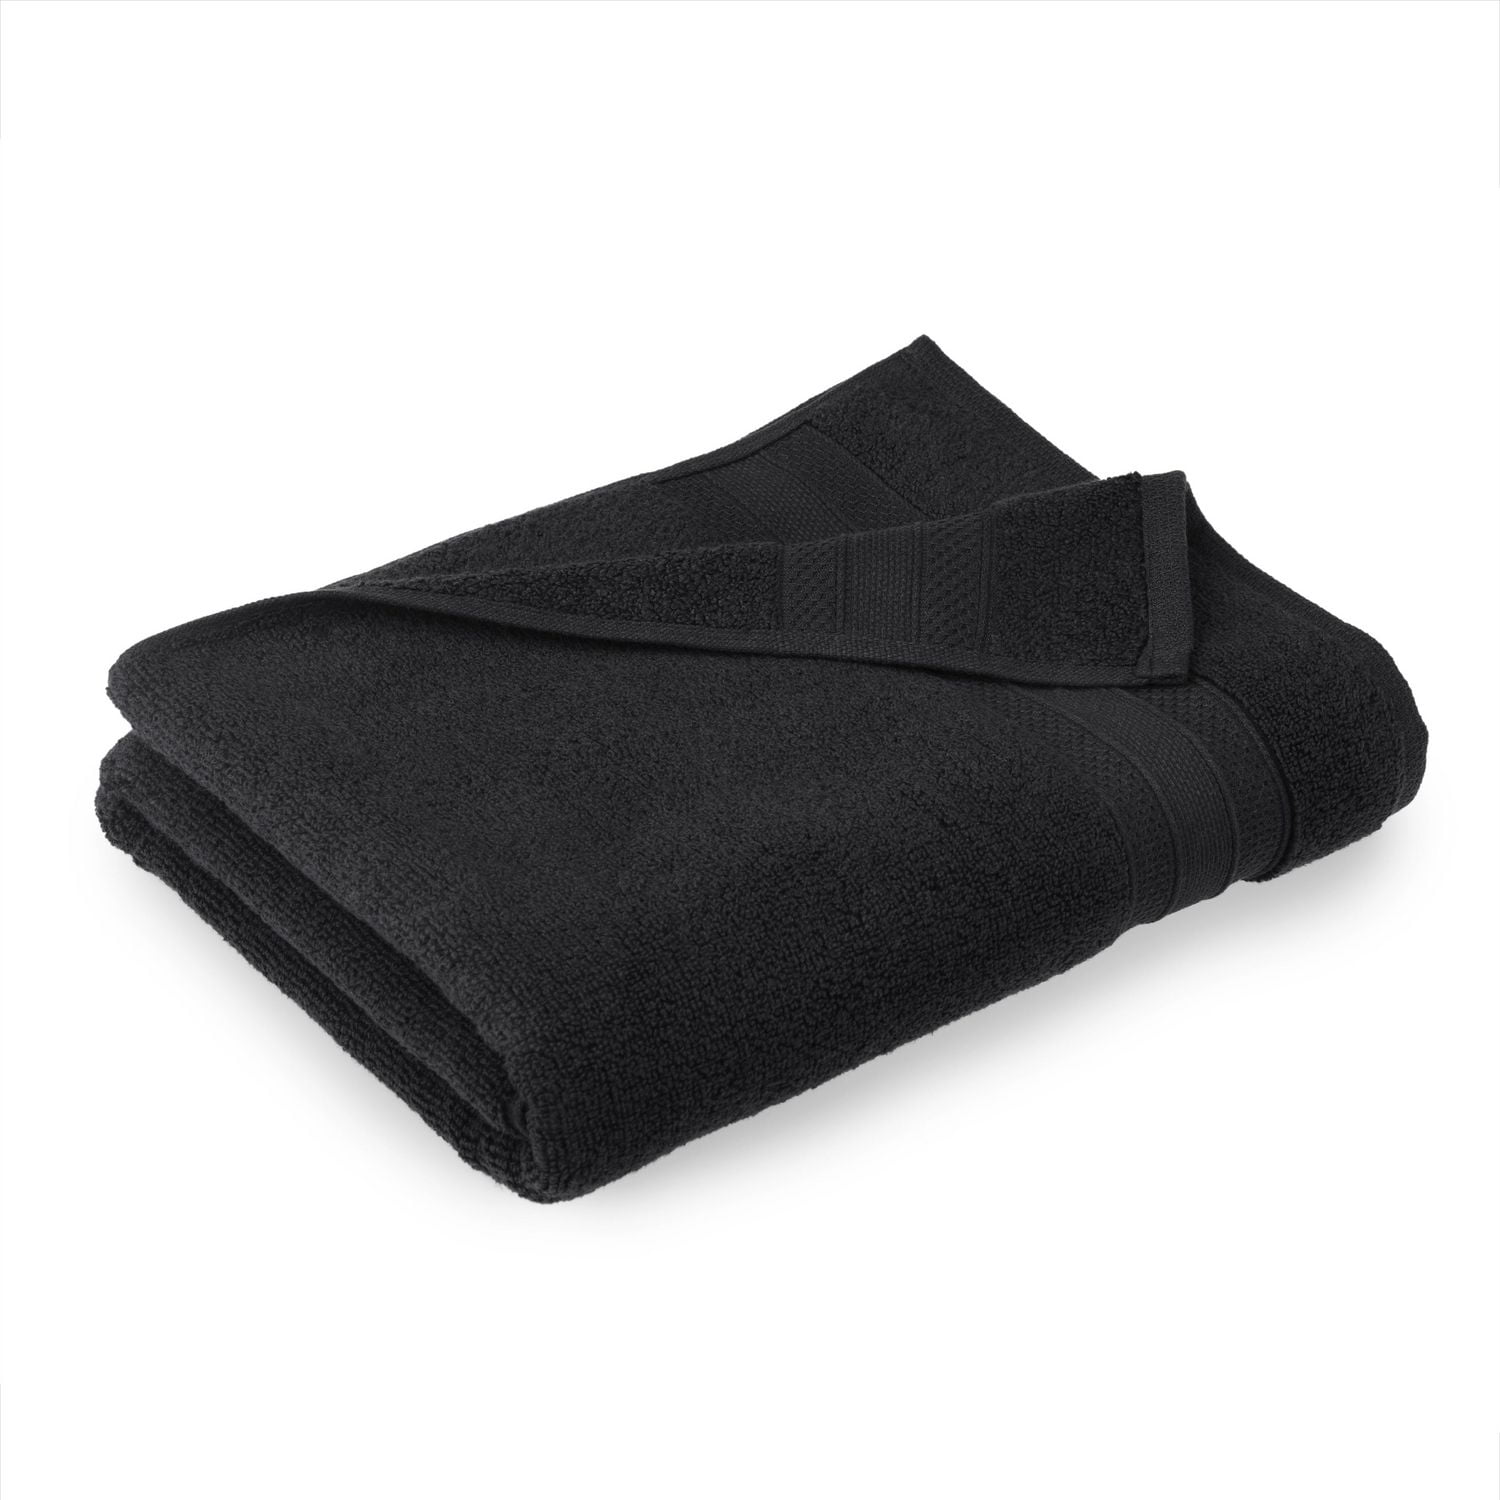 100% cotton thicker solid color microfiber face towel